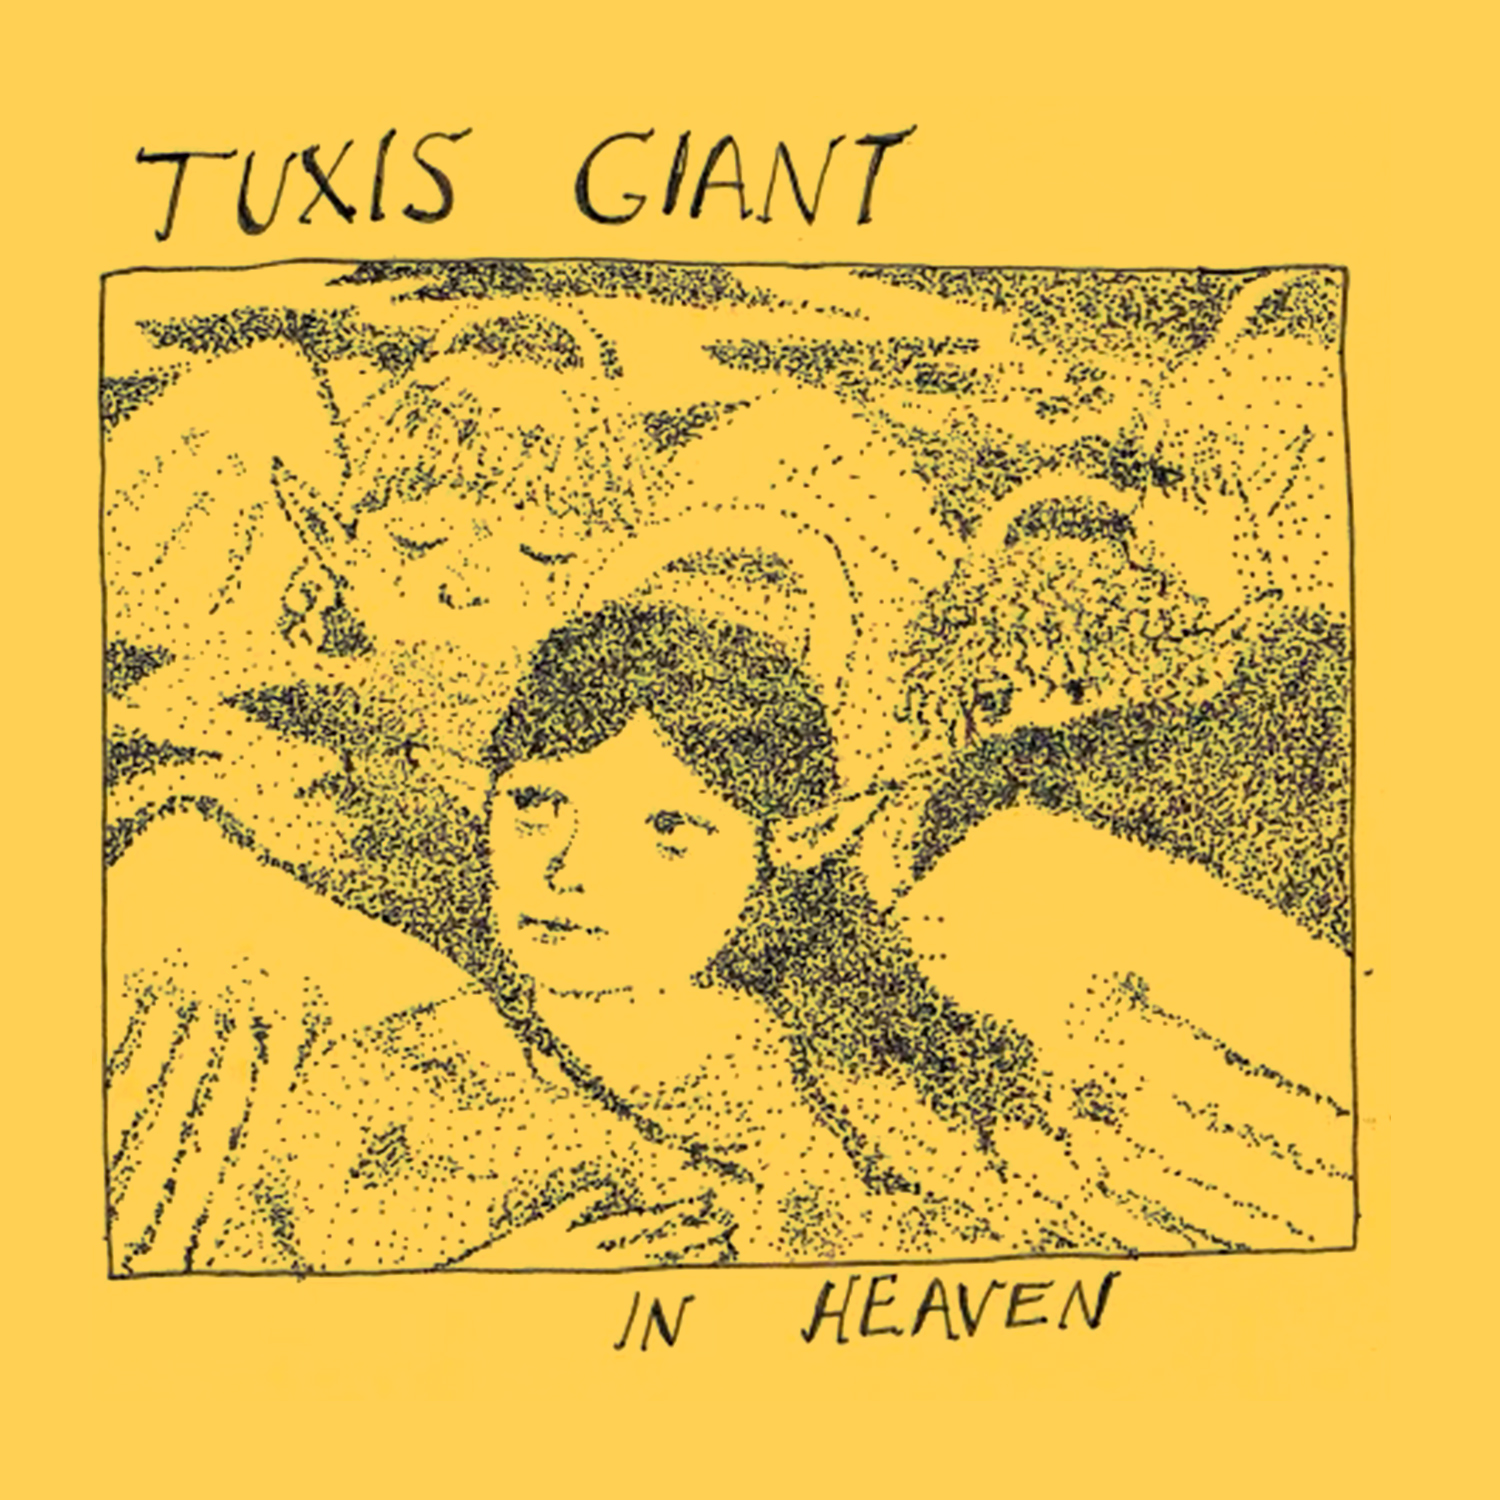 a pencil drawing on a yellow background of various androgynous angelic beings with the text Tuxis Giant, In Heaven